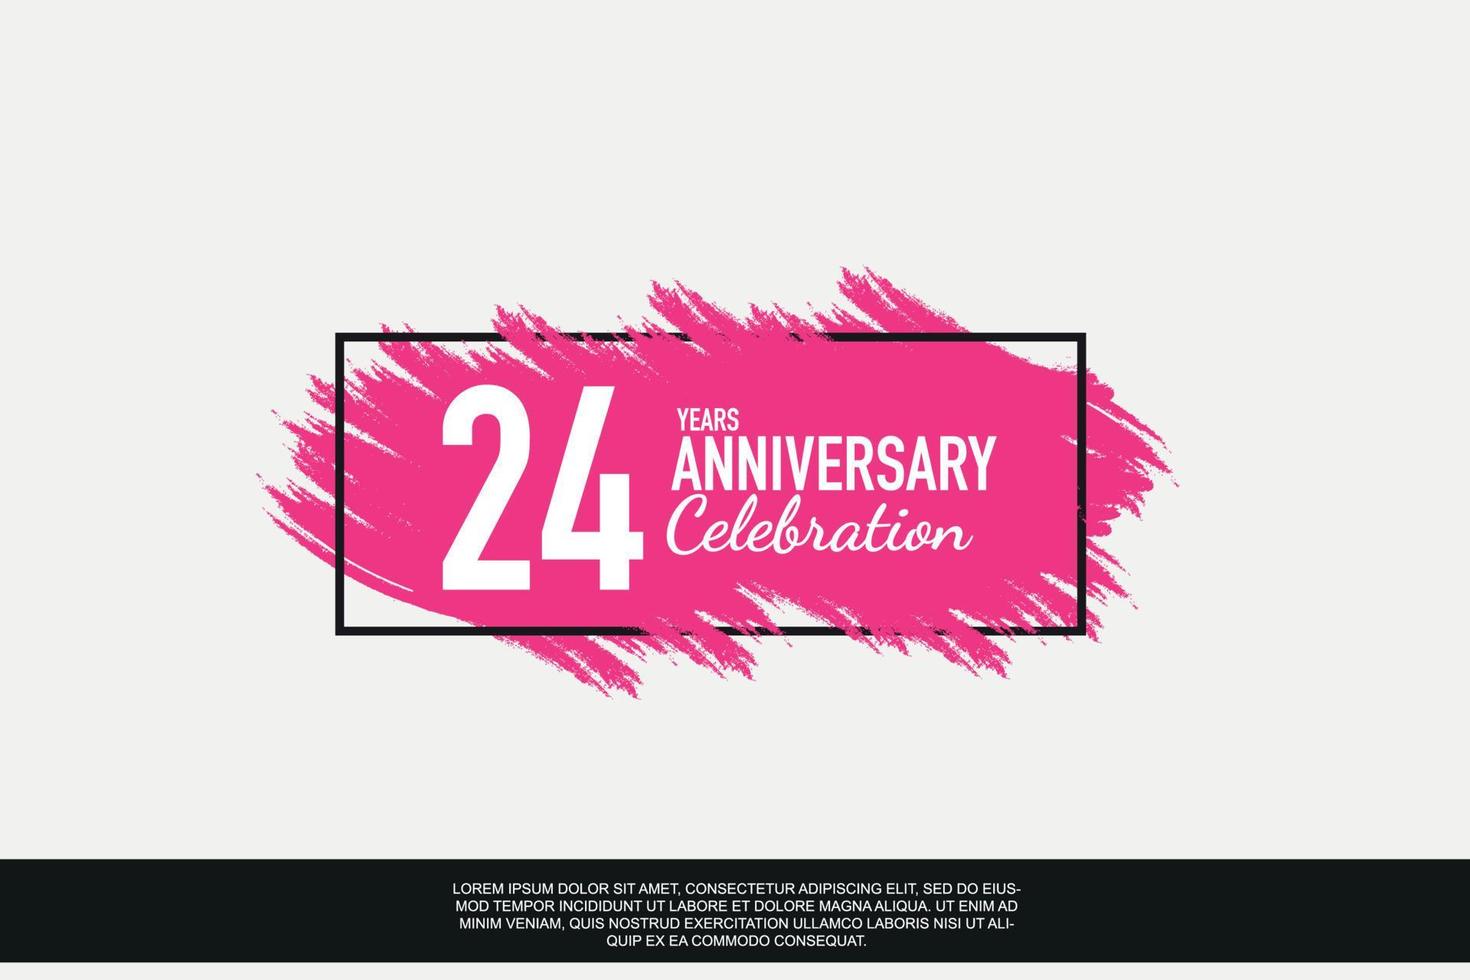 24 year anniversary celebration vector pink design in black frame on white background abstract illustration logo